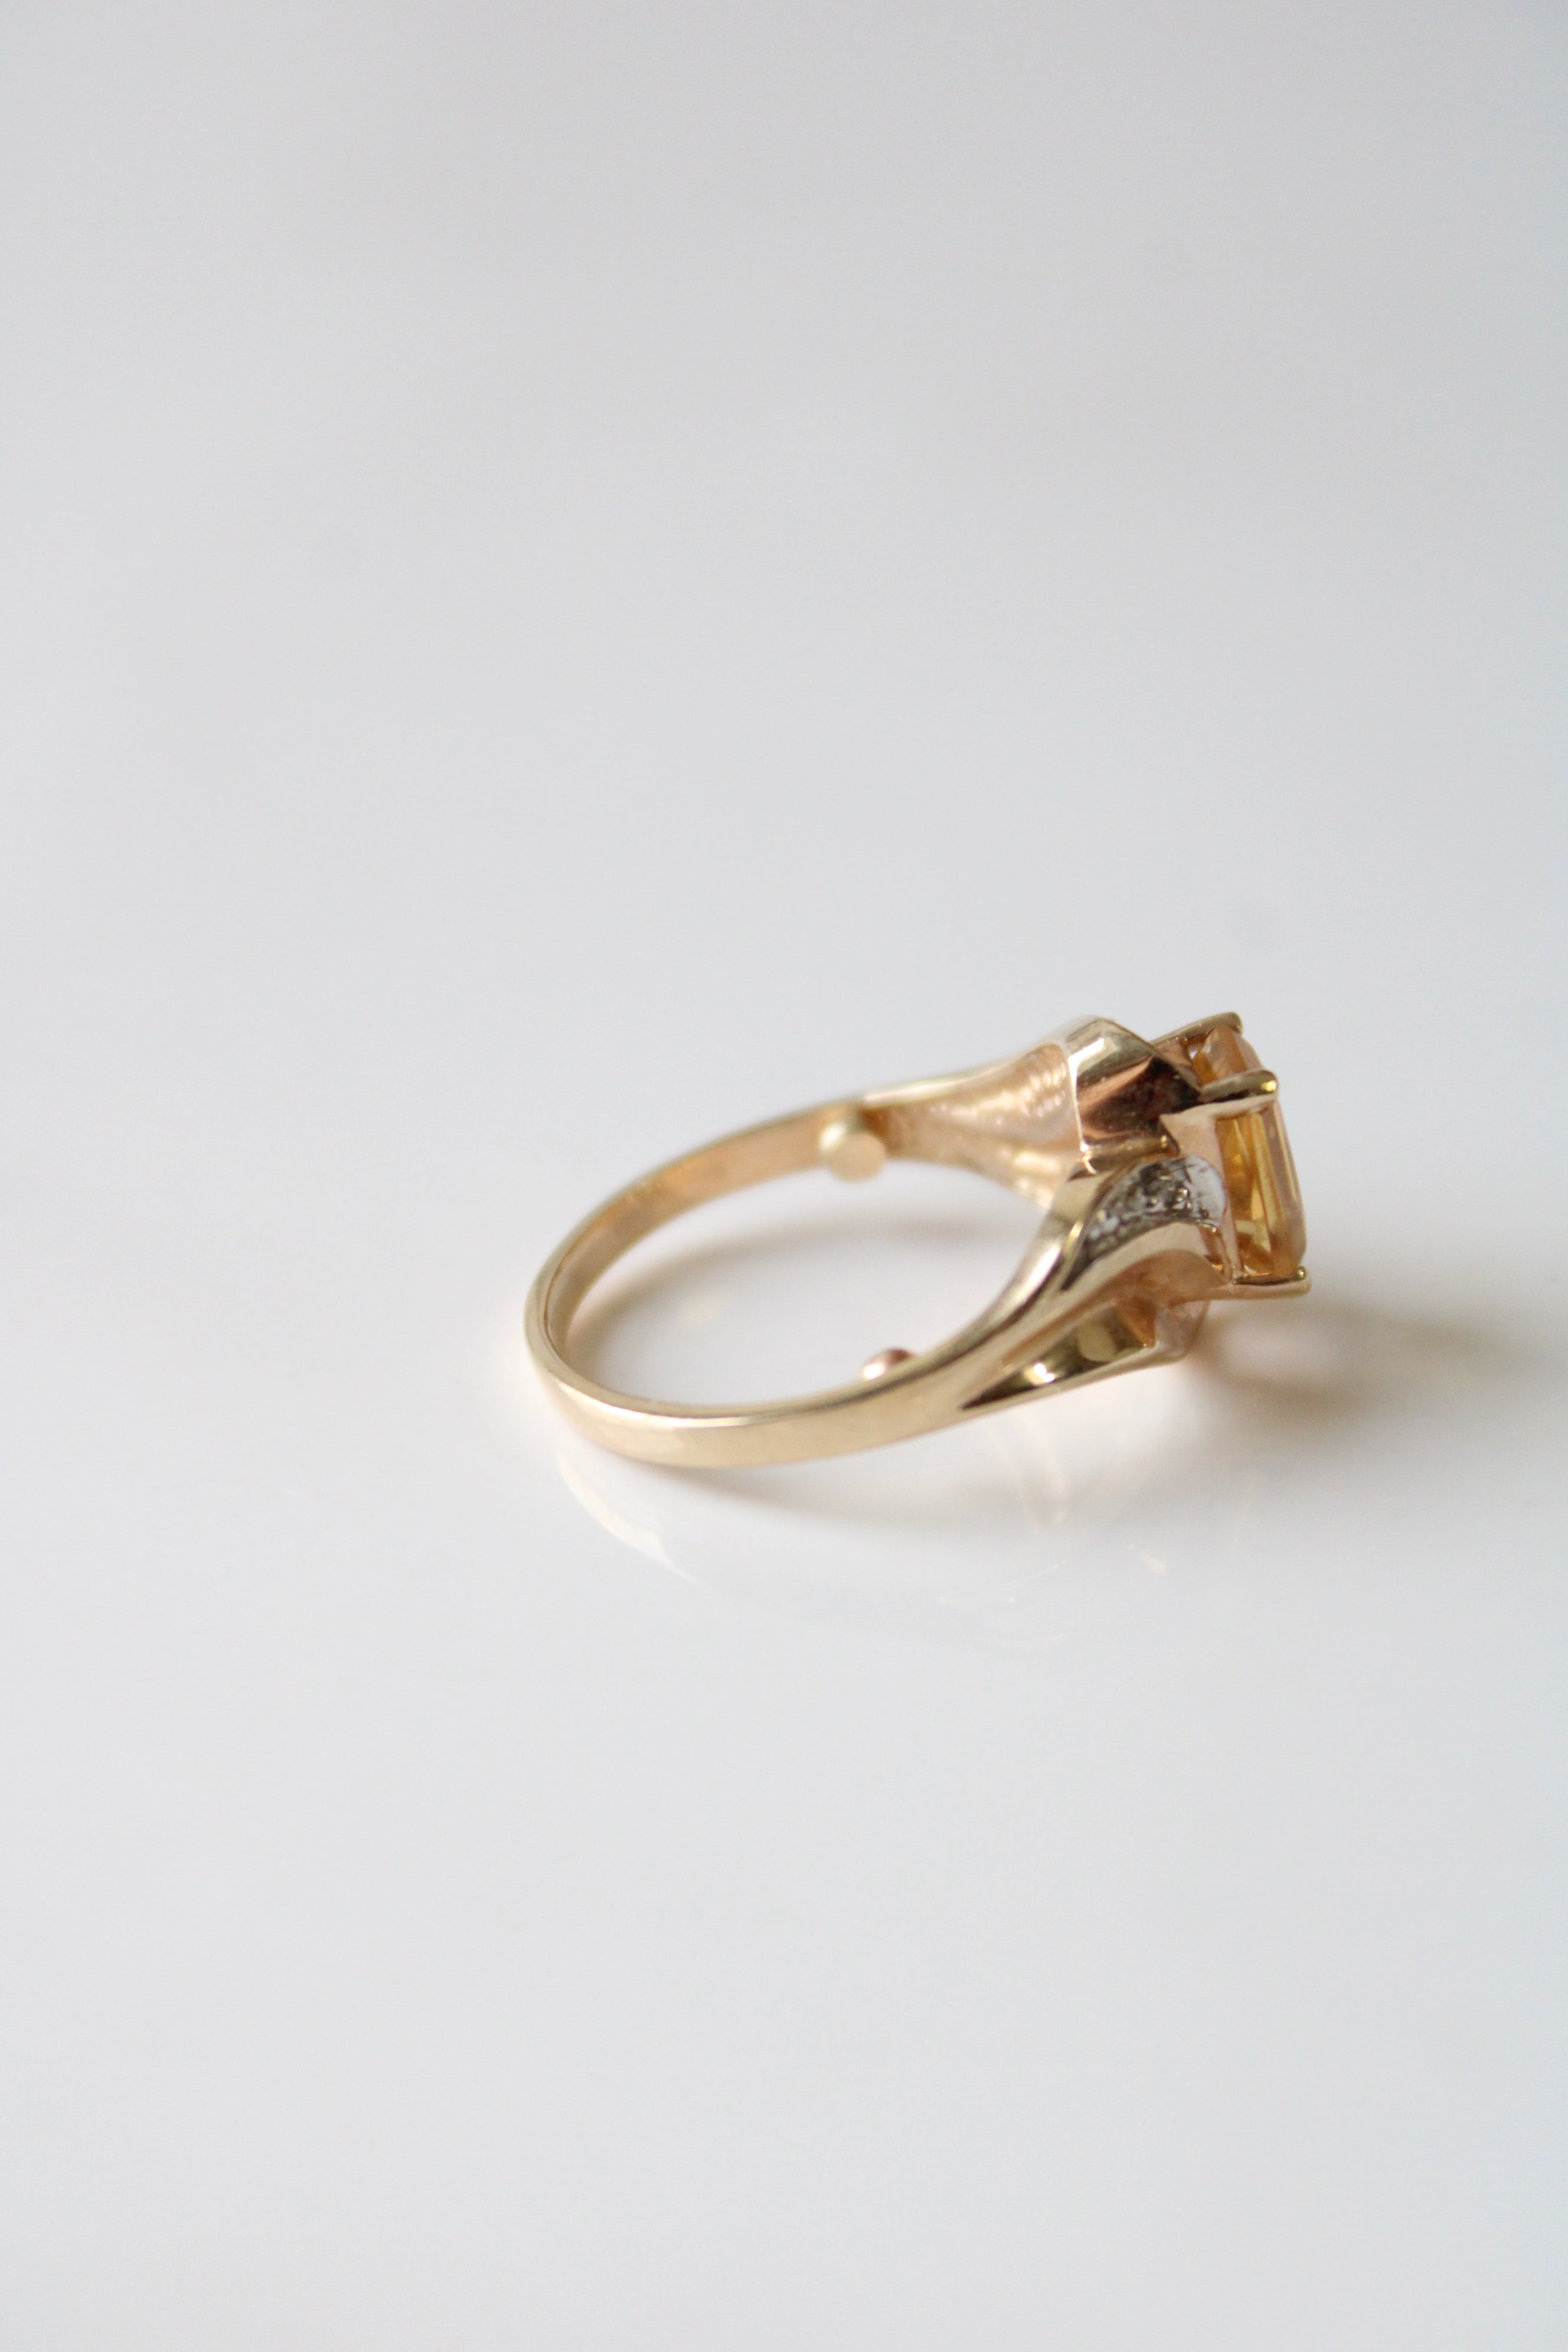 Emerald Cut Citrine Yellow 10KT Gold Ring | Size 6-6.5